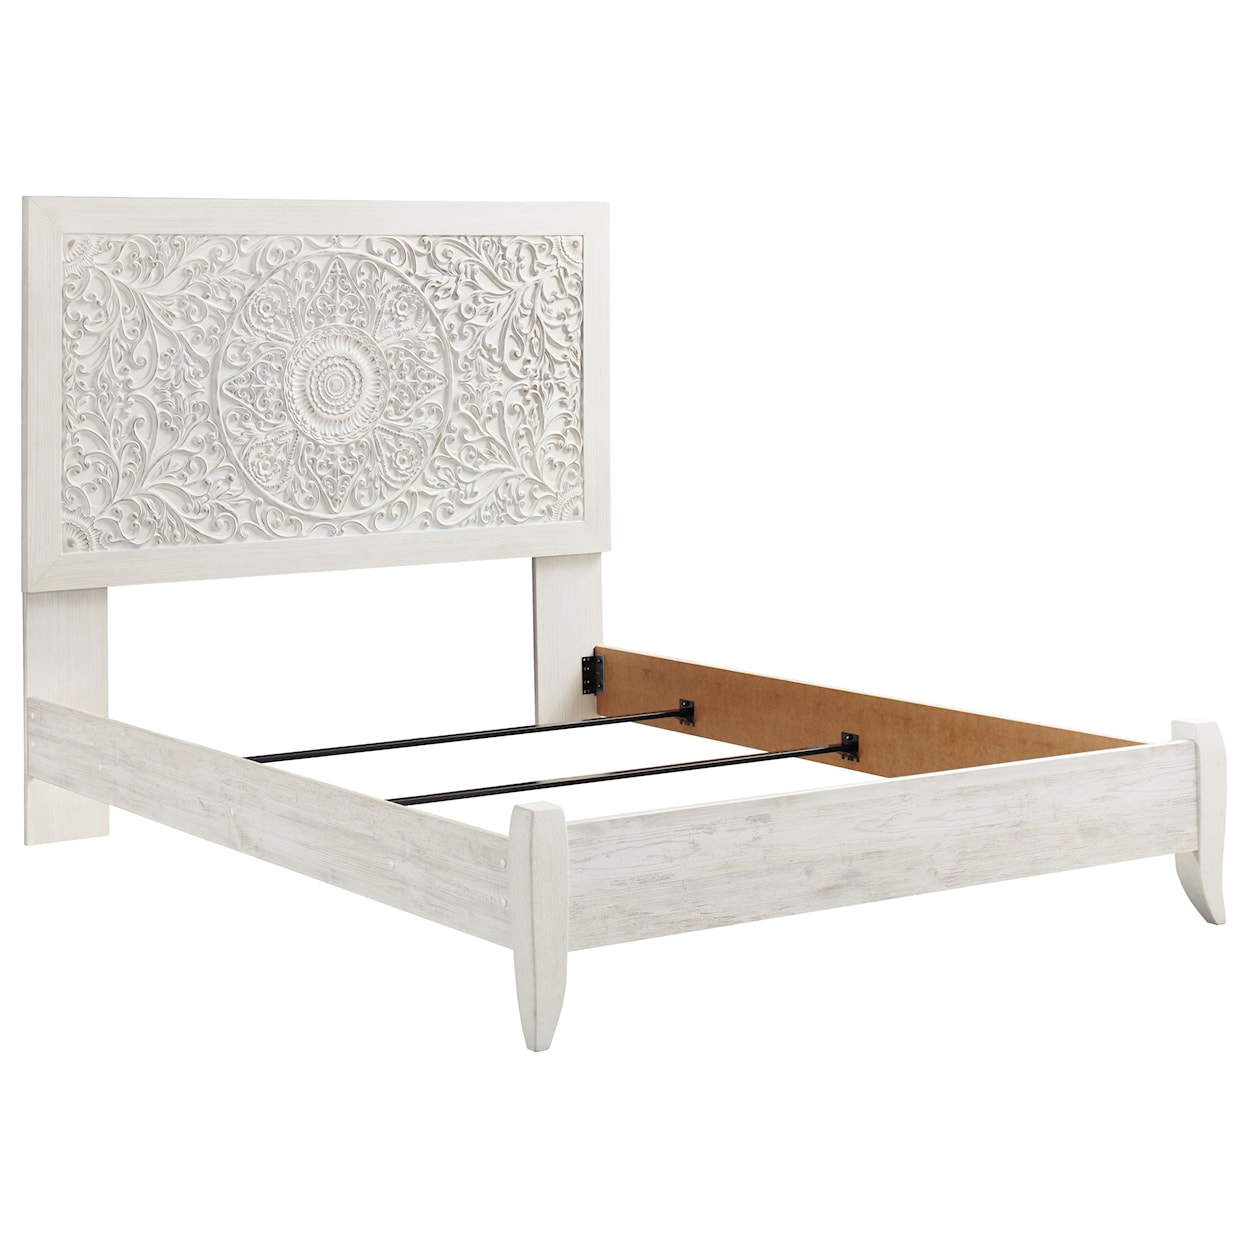 Signature Design by Ashley Furniture Paxberry Queen Panel Bed